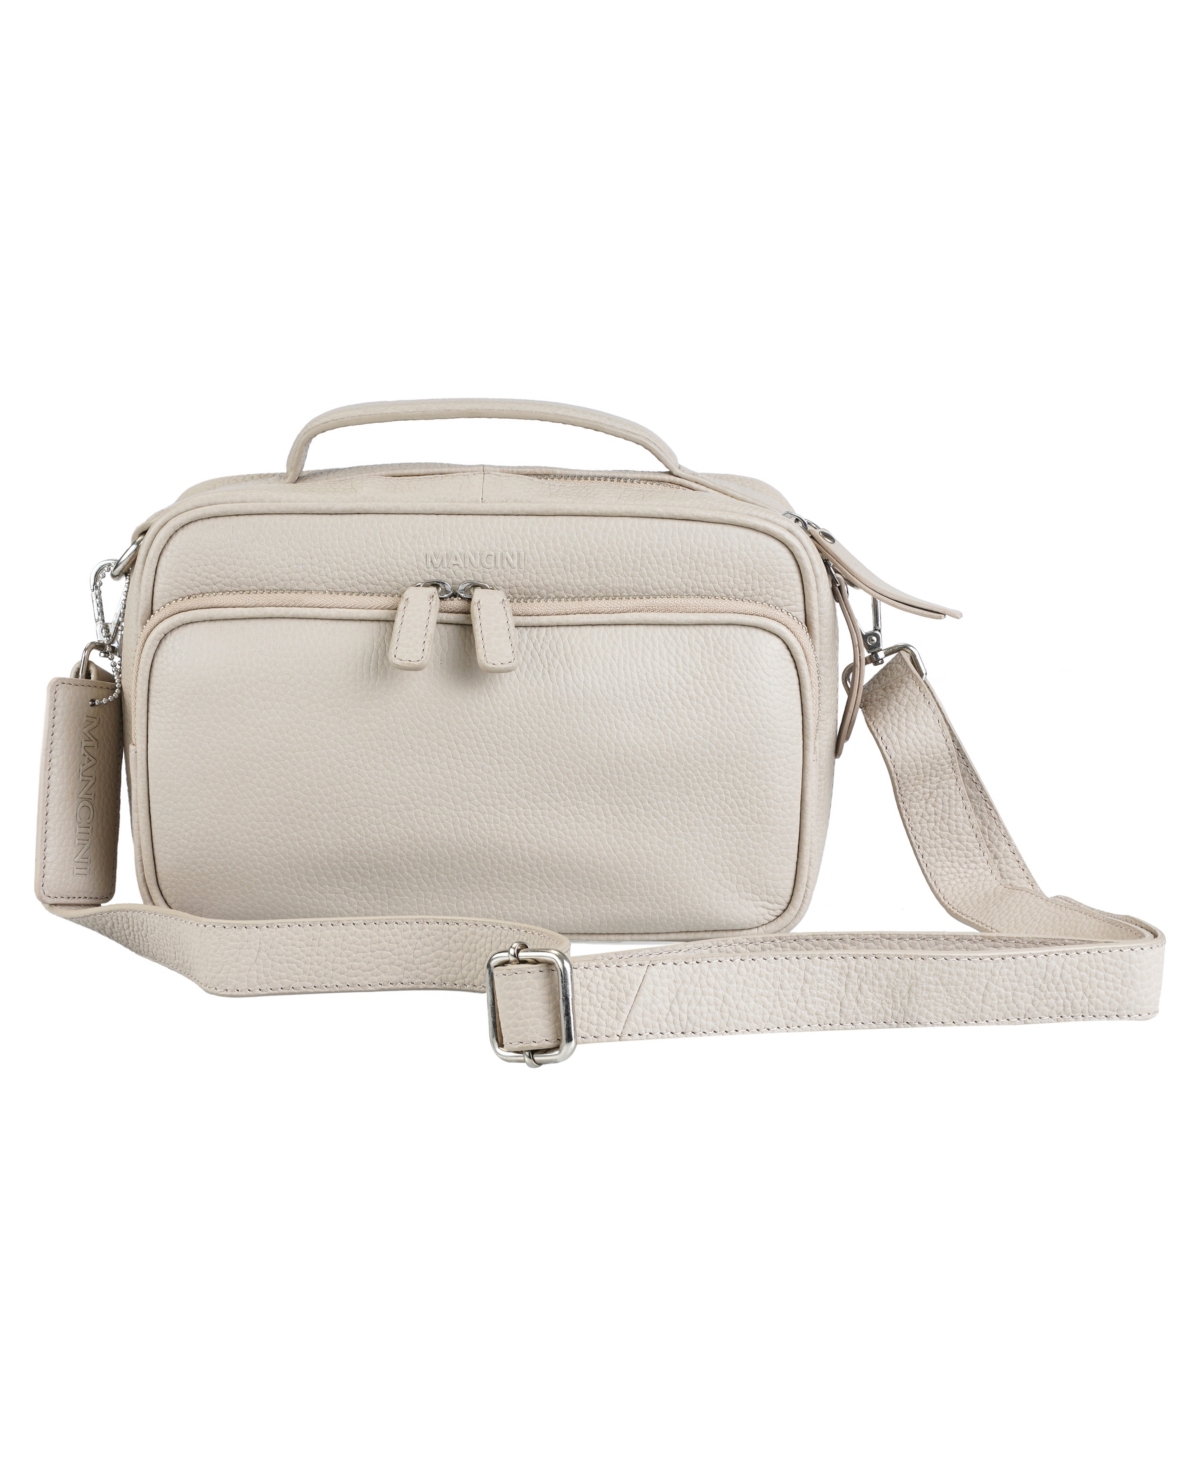 Mancini Pebbled Collection Julianna Leather Crossbody Satchel Bag In Taupe